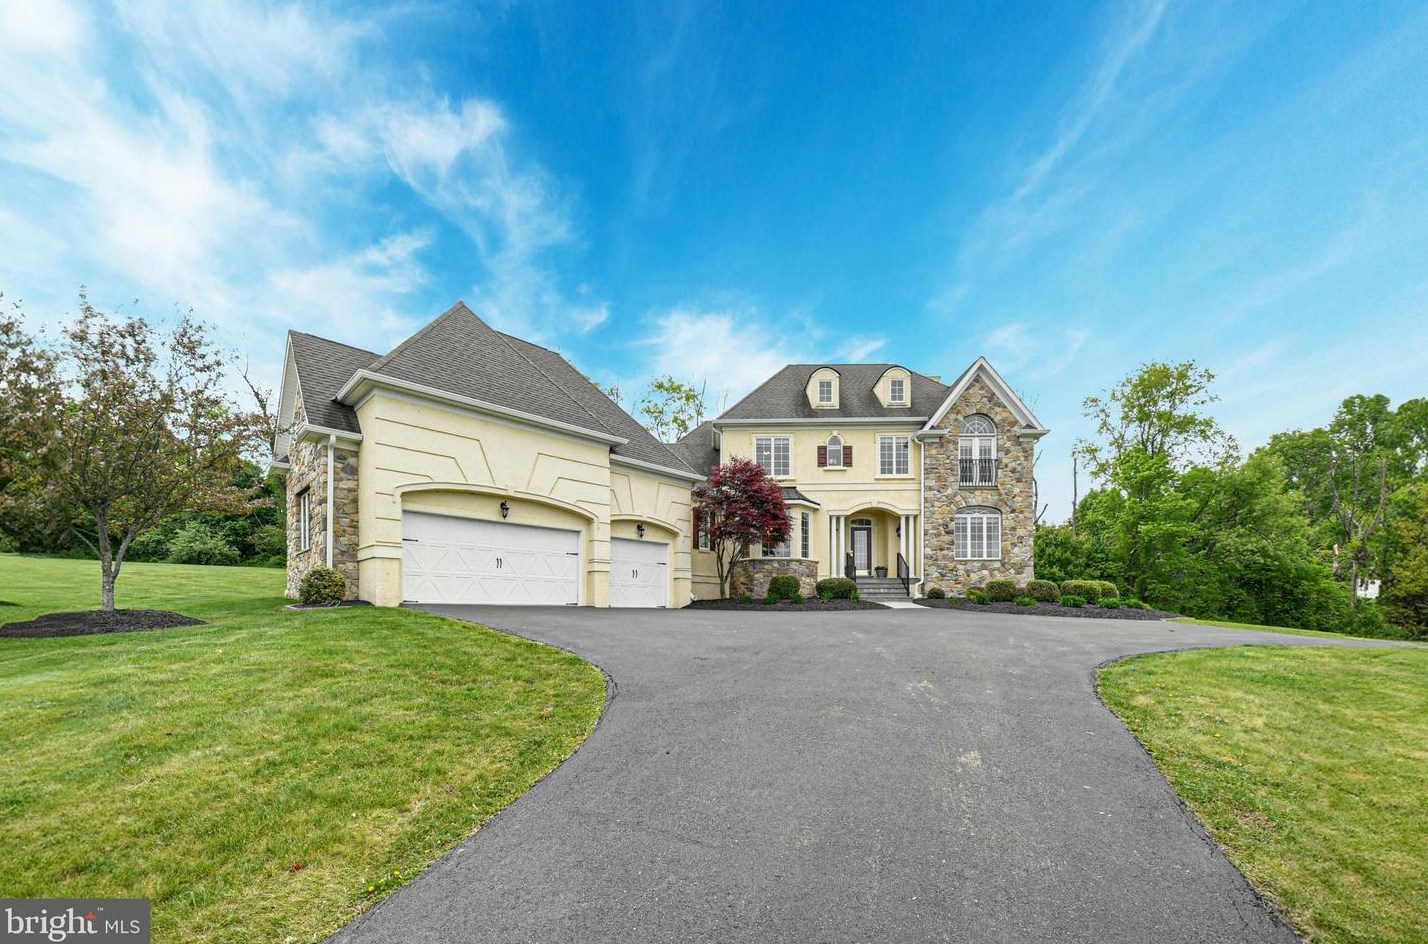 2710 Imperial Crest Ln, Hellertown, PA 18055